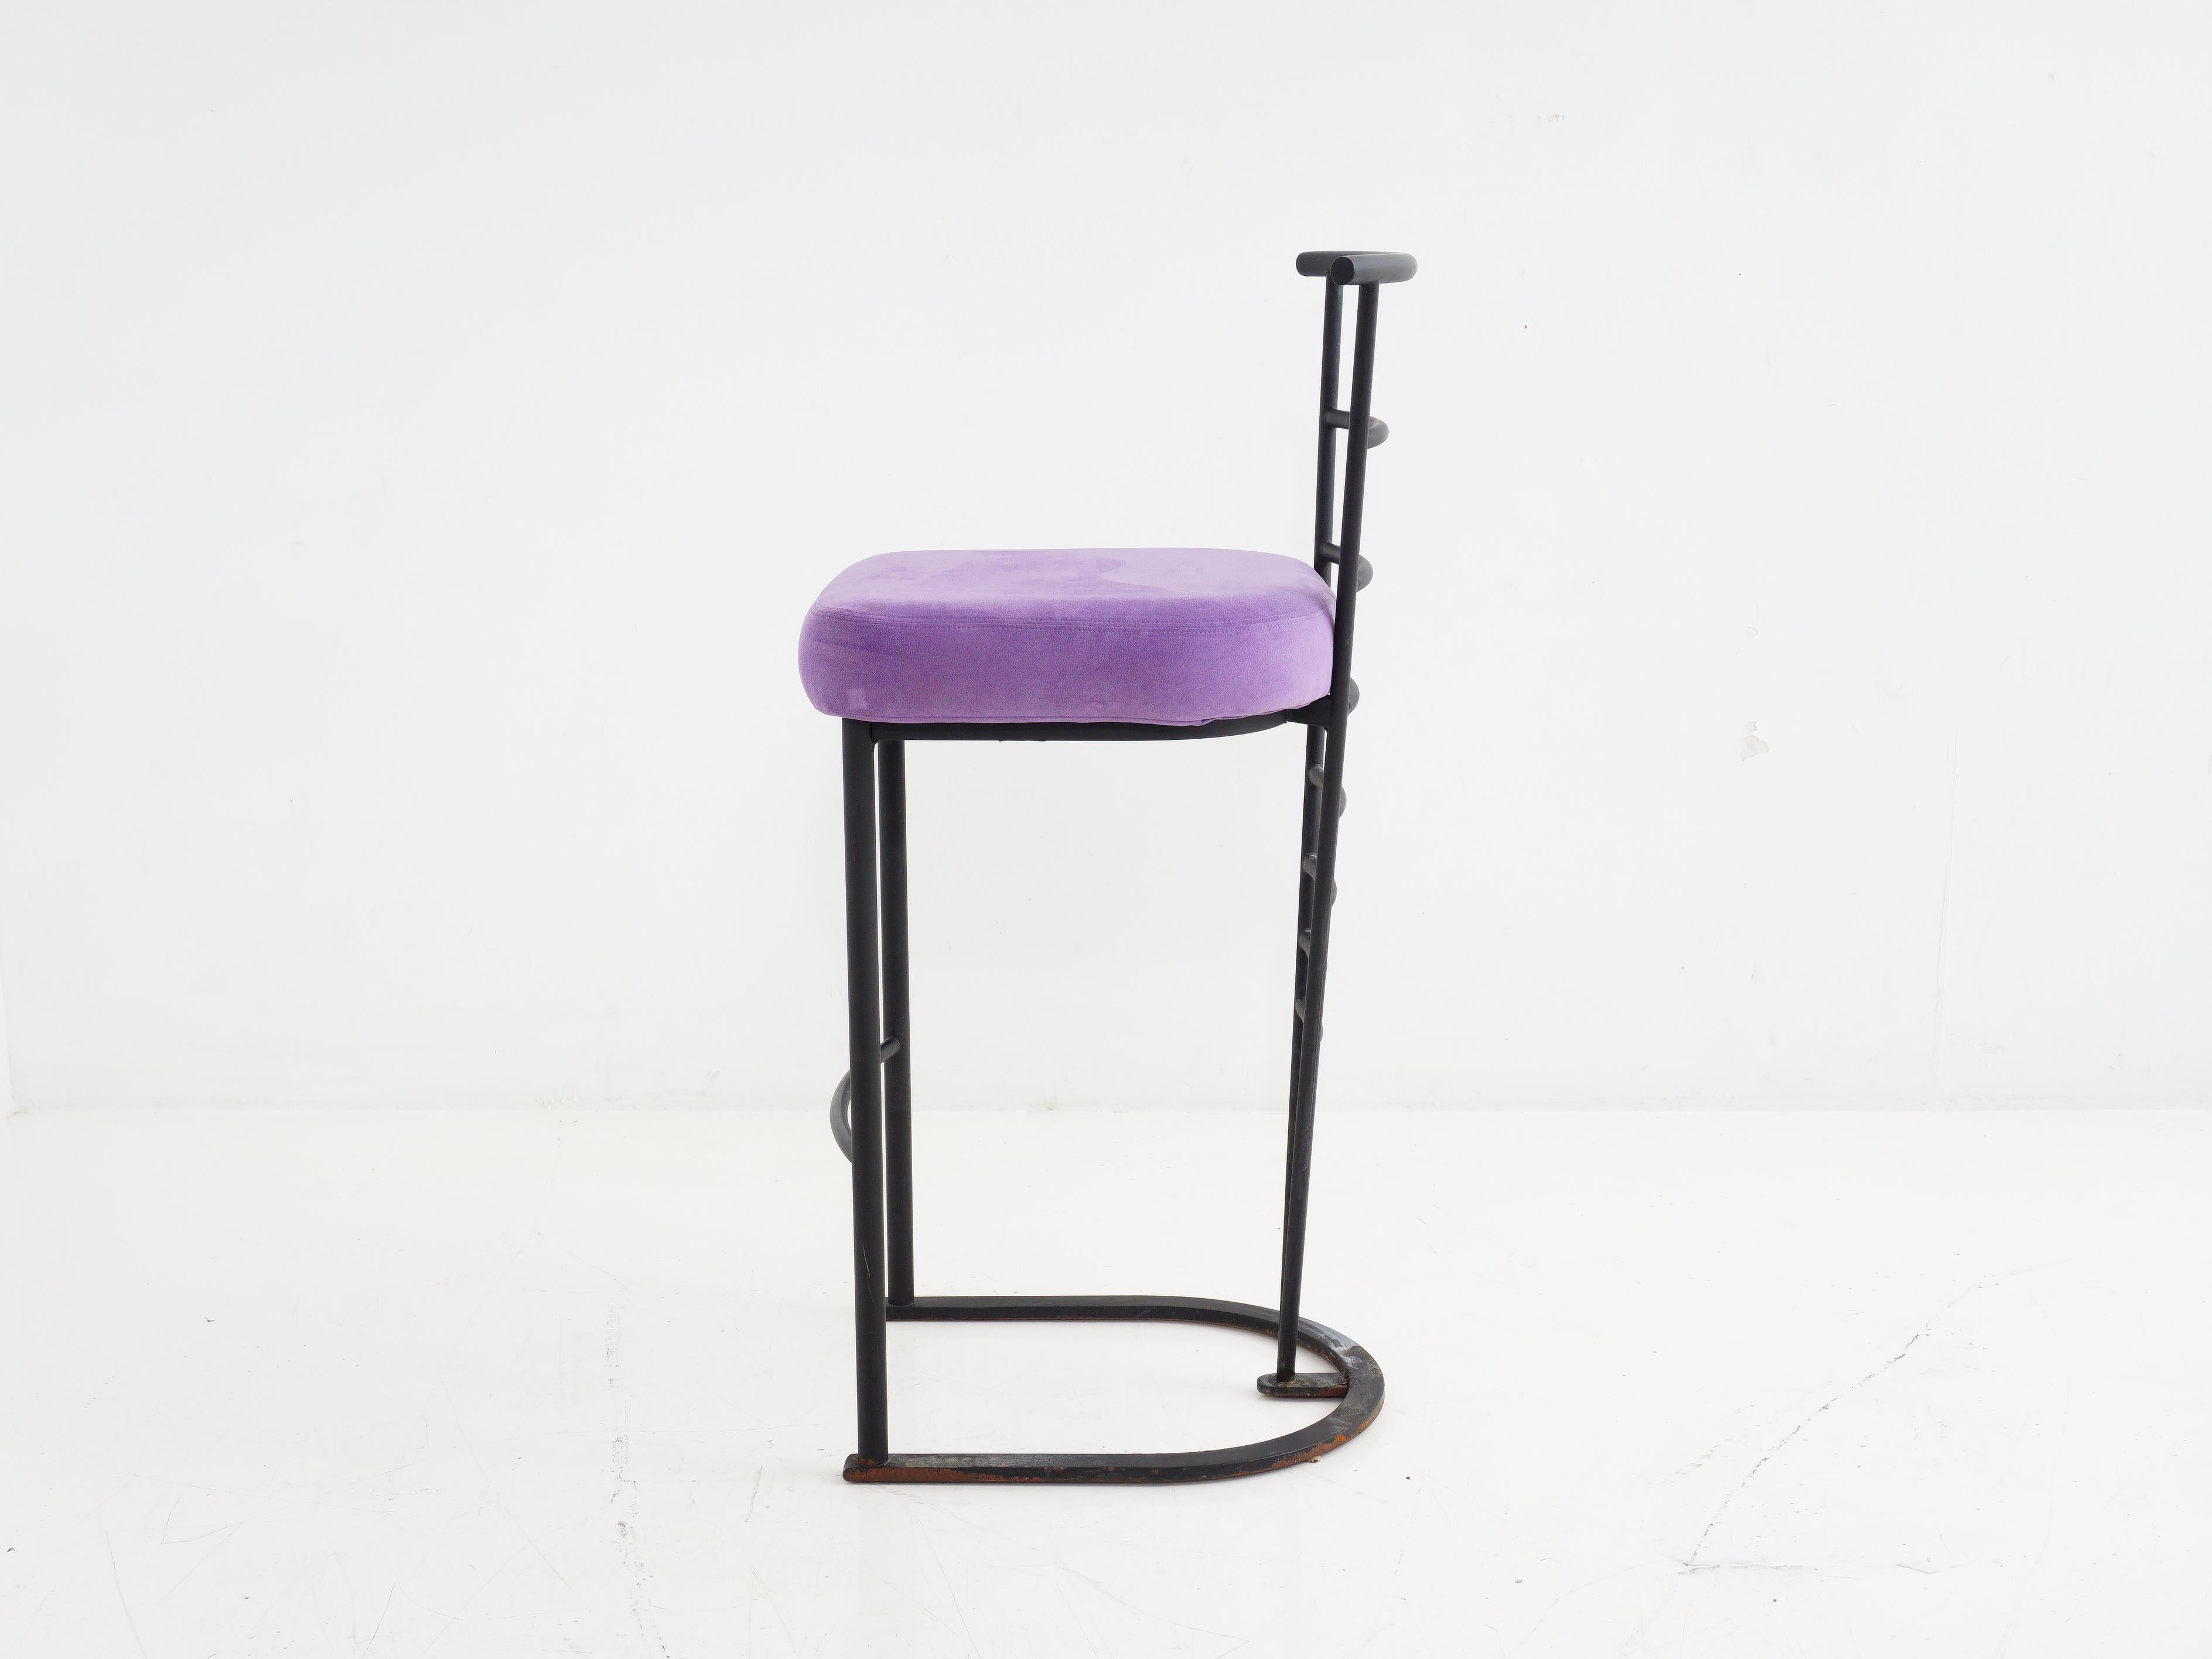 Elevate your seat game with this 1970s Art Deco style black metal bar stool. It's the velvet underground of bar seating, draped in opulent purple suede. Step back in time and sip your cocktails with a side of vintage glam.

- 40